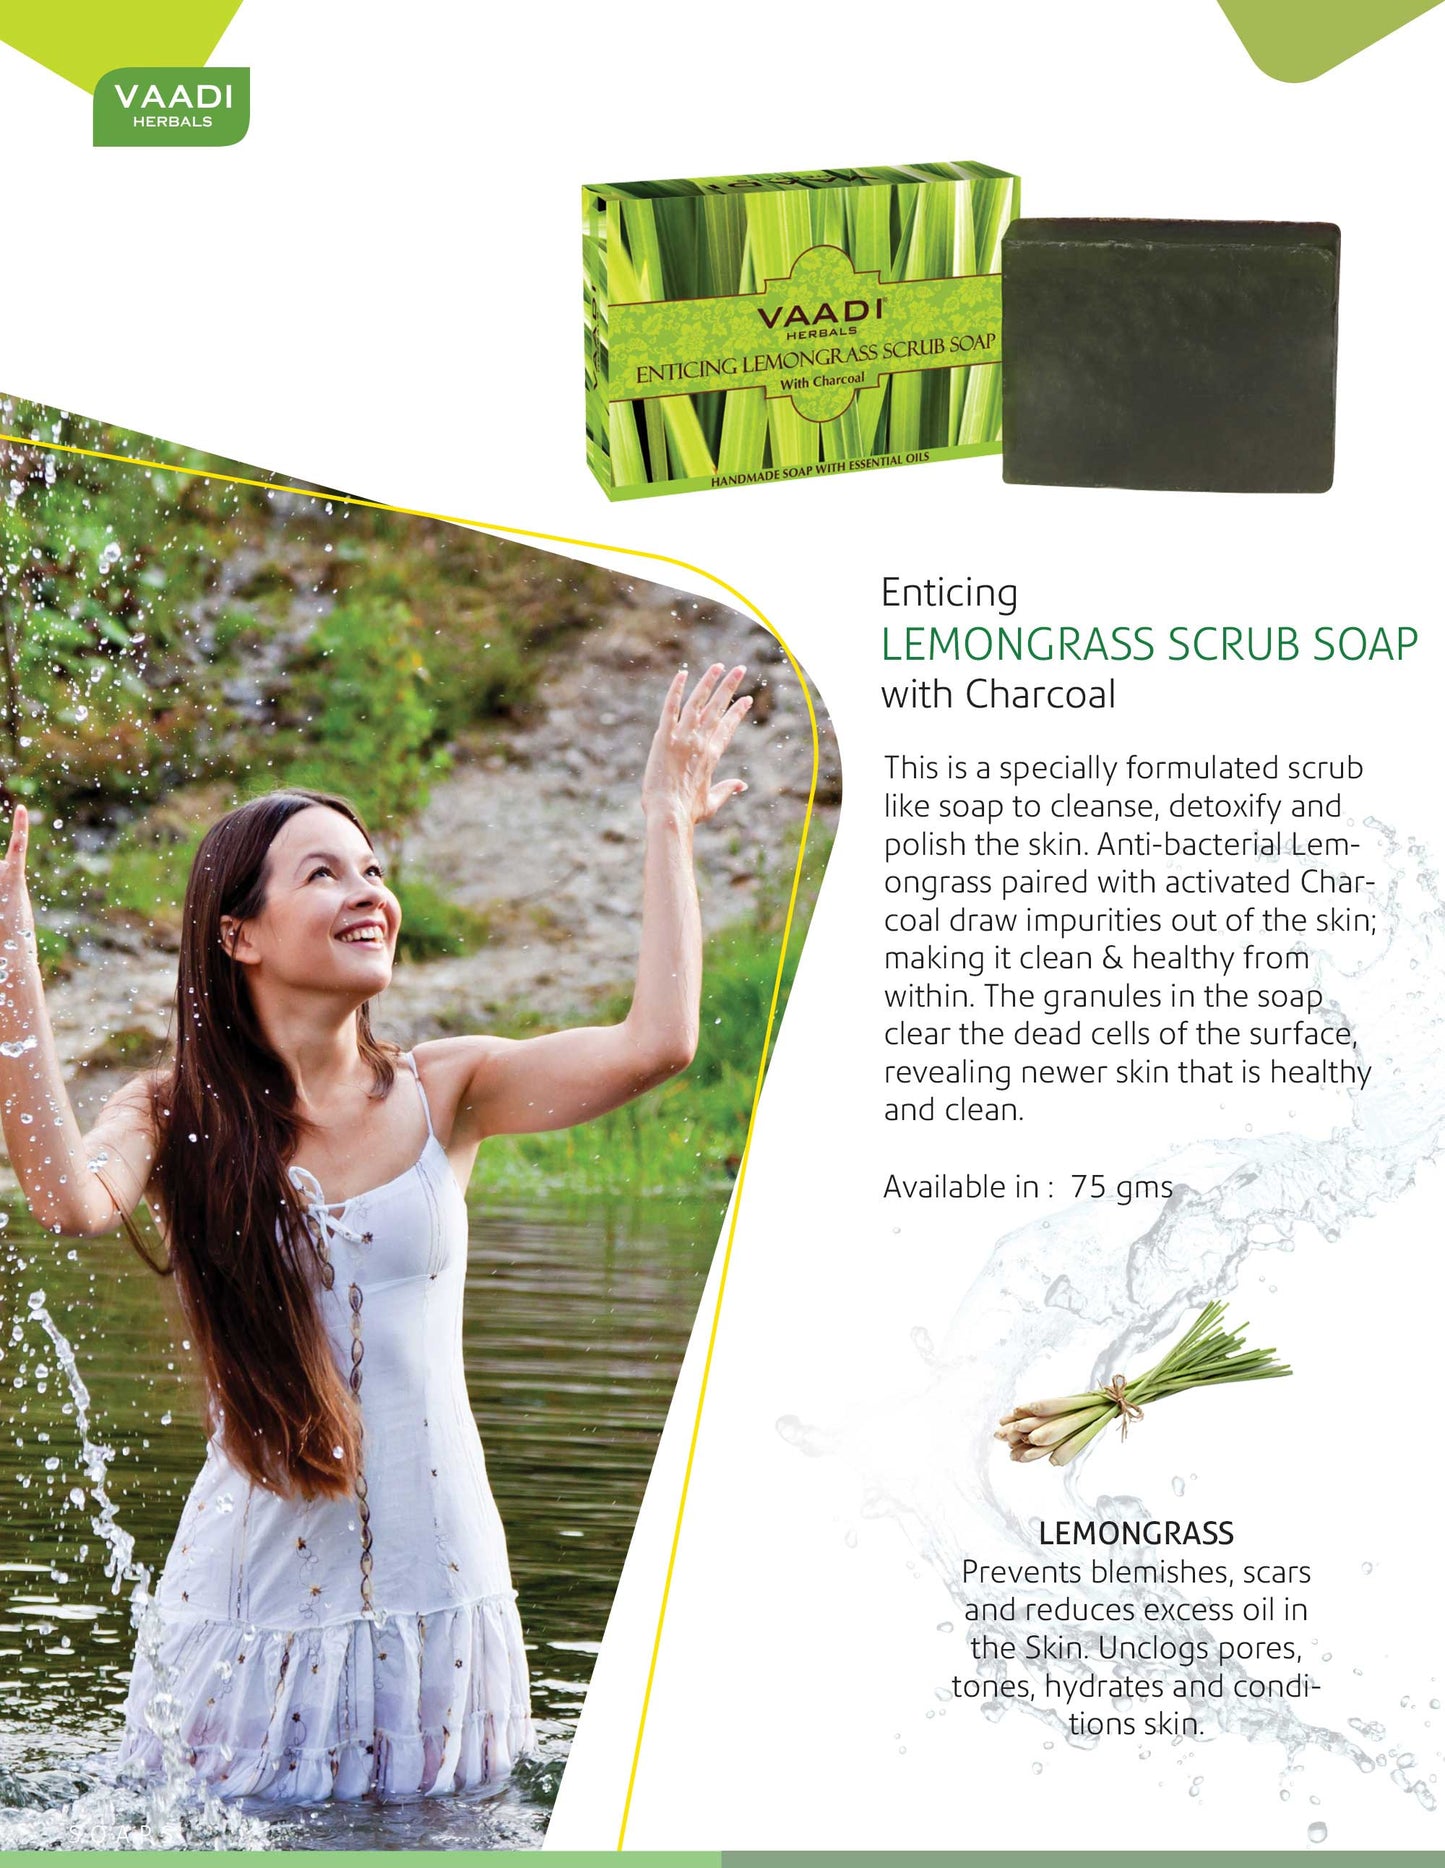 Enticing Organic Lemongrass Soap with Charcoal - Exfoliates & Polishes Skin - Makes Skin Smooth (6 x 75 gms / 2.7 oz)